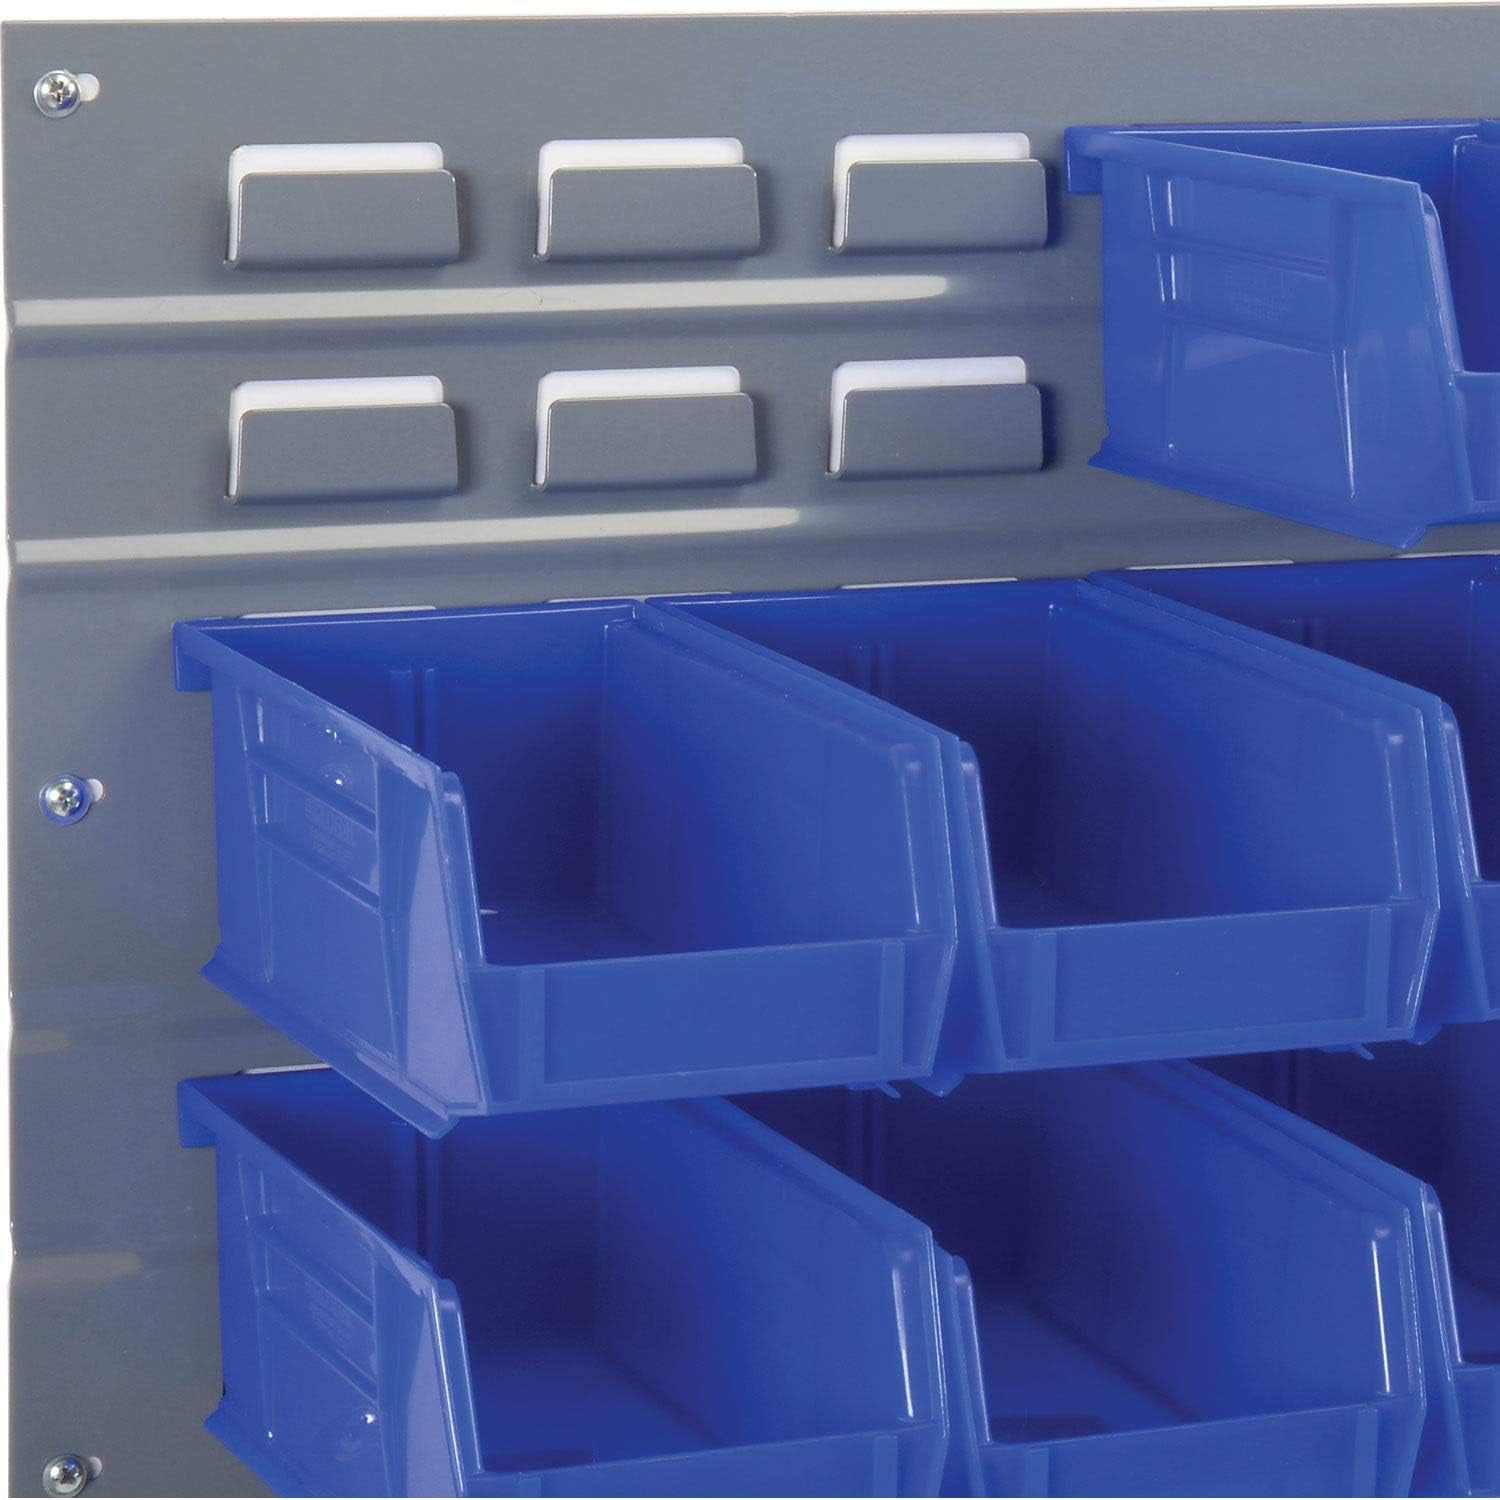 Large Blue Parts Bin for Cabinets and Pick Racks